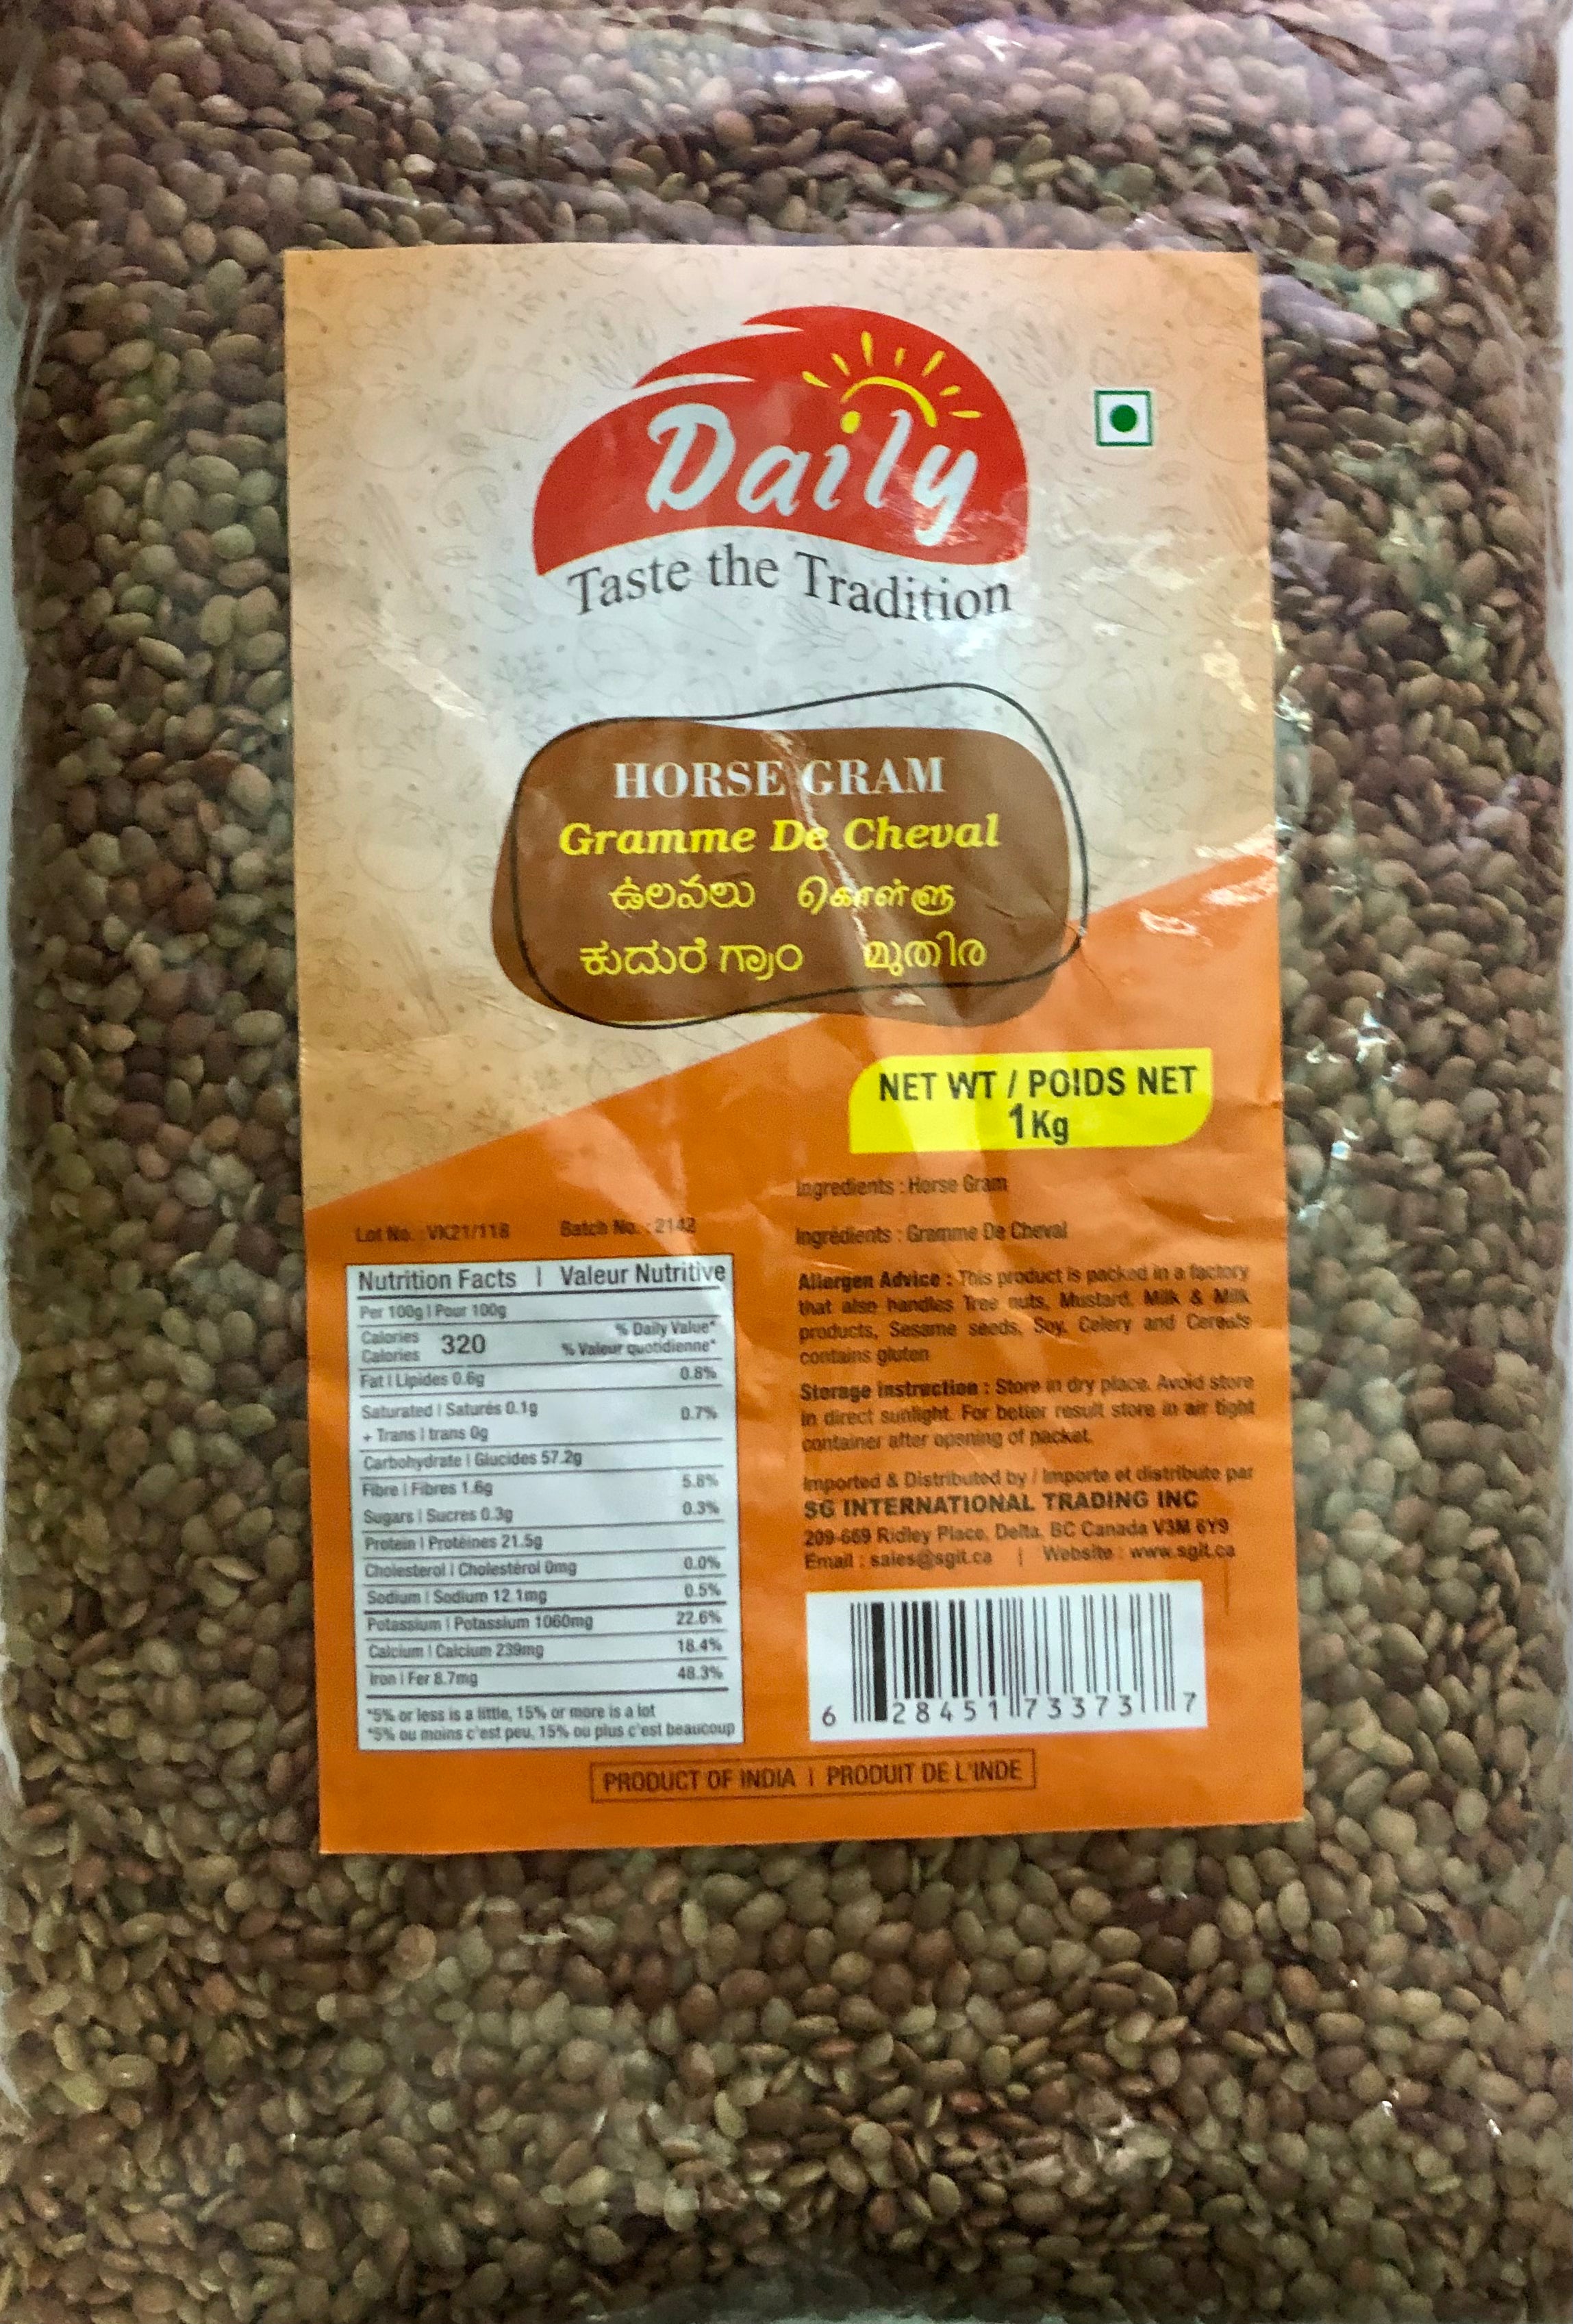 Horse Gram whole - 1 Kg. - Daily